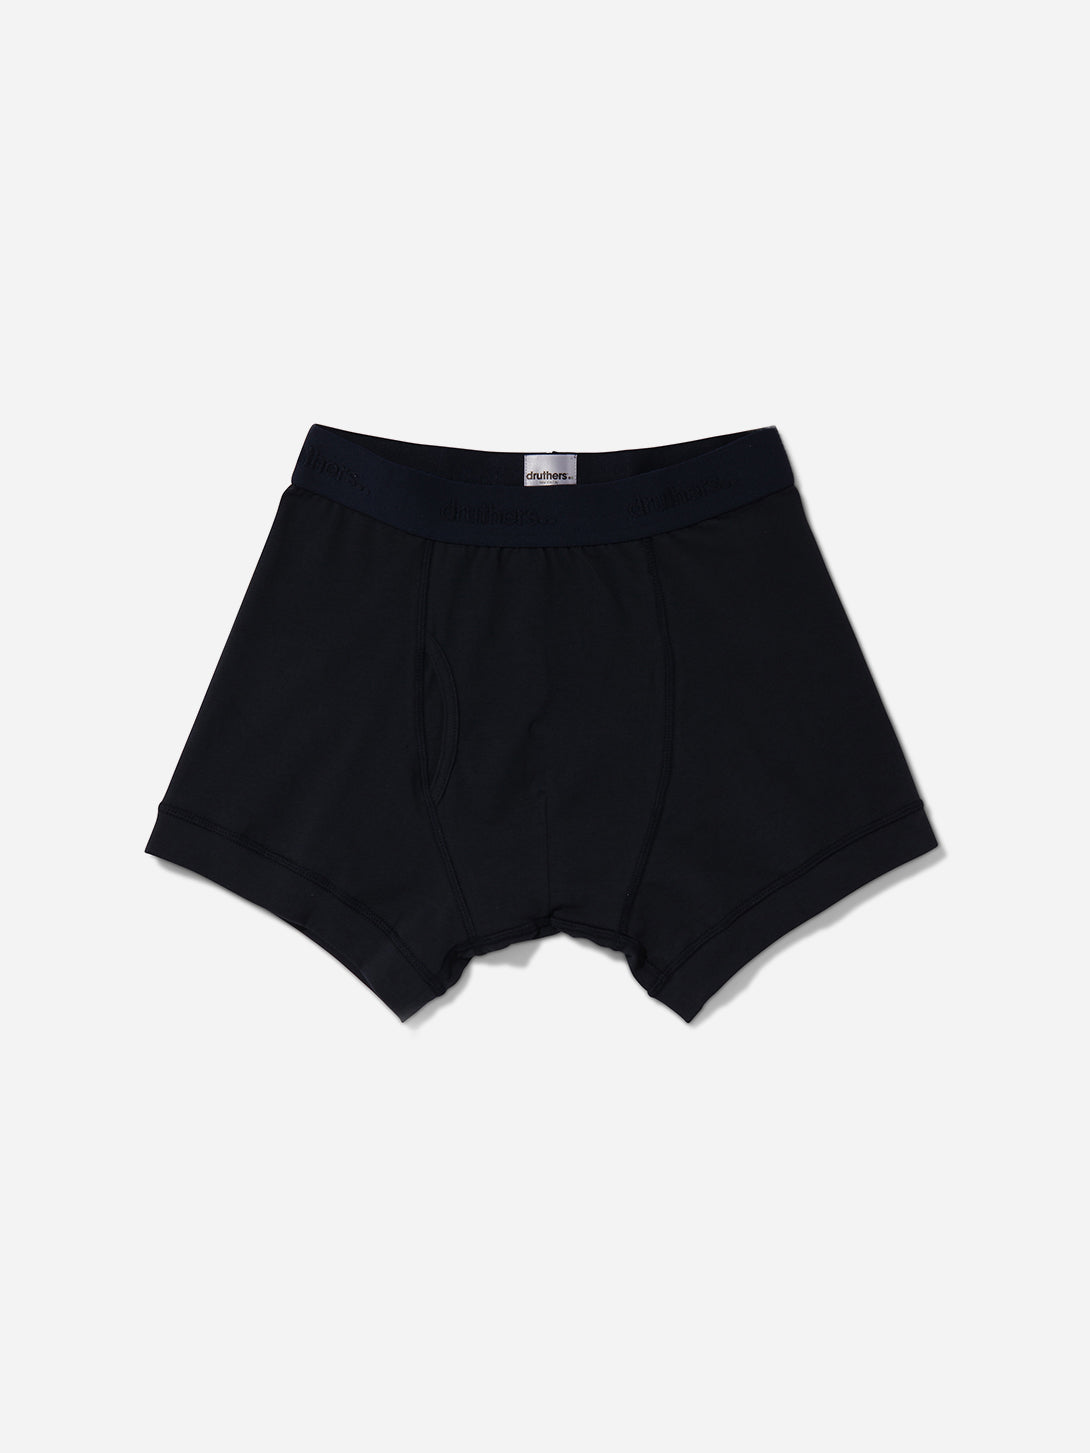 Black boxer brief by druthers